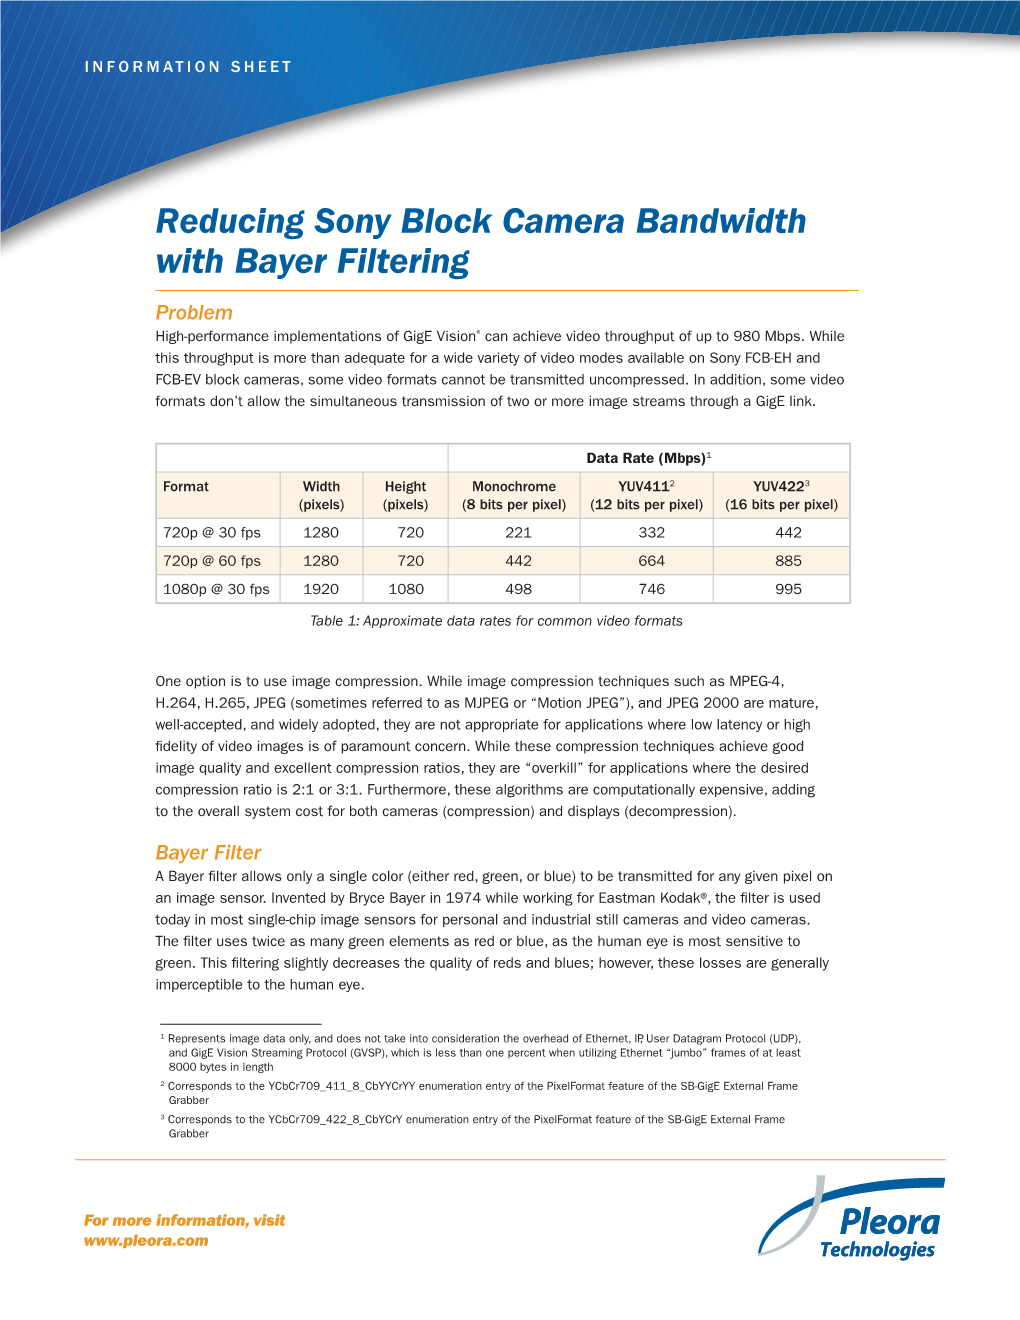 Reducing Sony Block Camera Bandwidth with Bayer Filtering Problem High-Performance Implementations of Gige Vision® Can Achieve Video Throughput of up to 980 Mbps